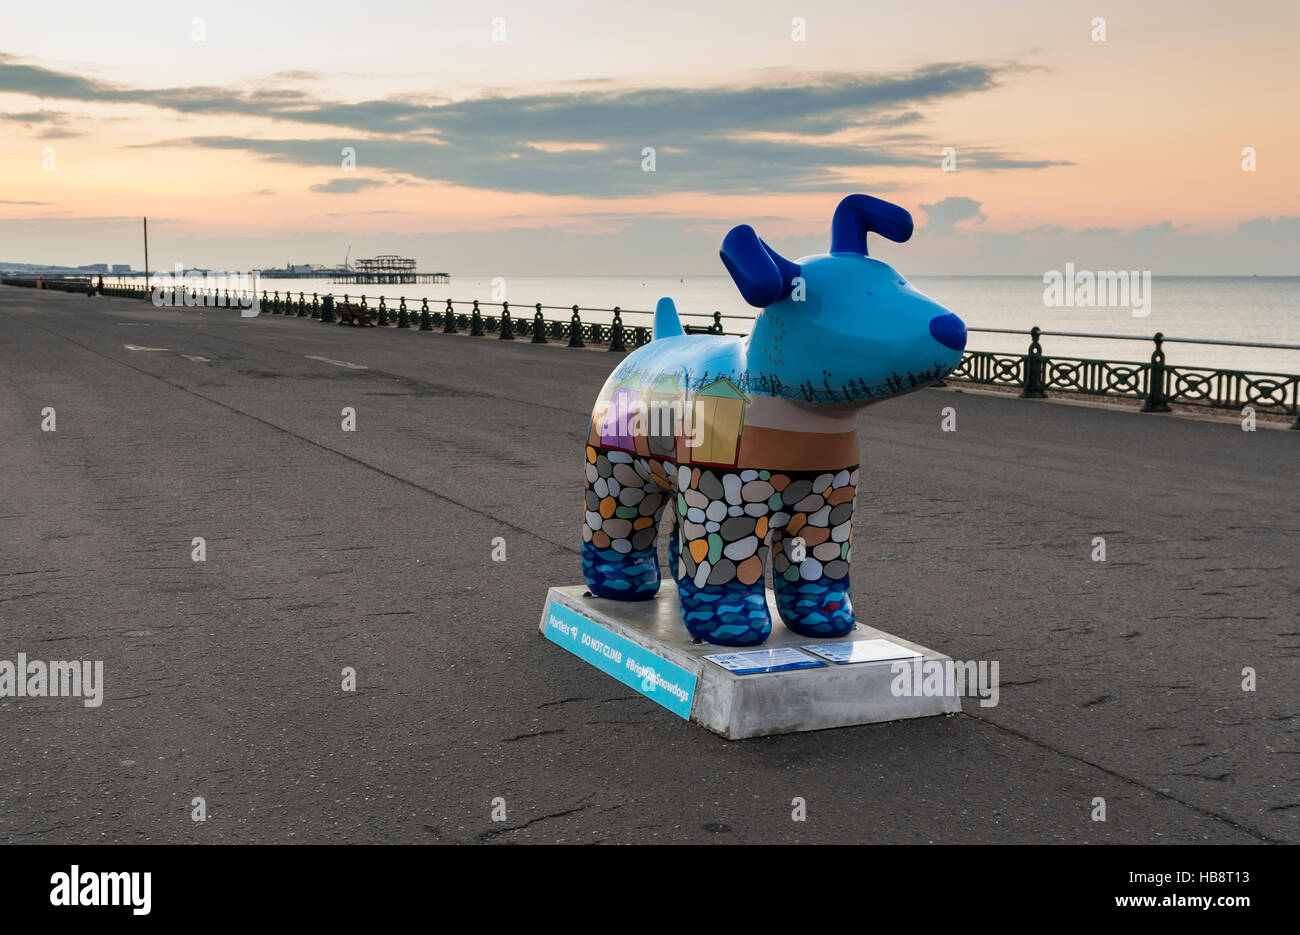 View of a Snowdog sculpture on Hove promenade at sunrise. The Snowdogs by the Sea public exhibition took place in 2016 to raise money for The Martlets Stock Photo